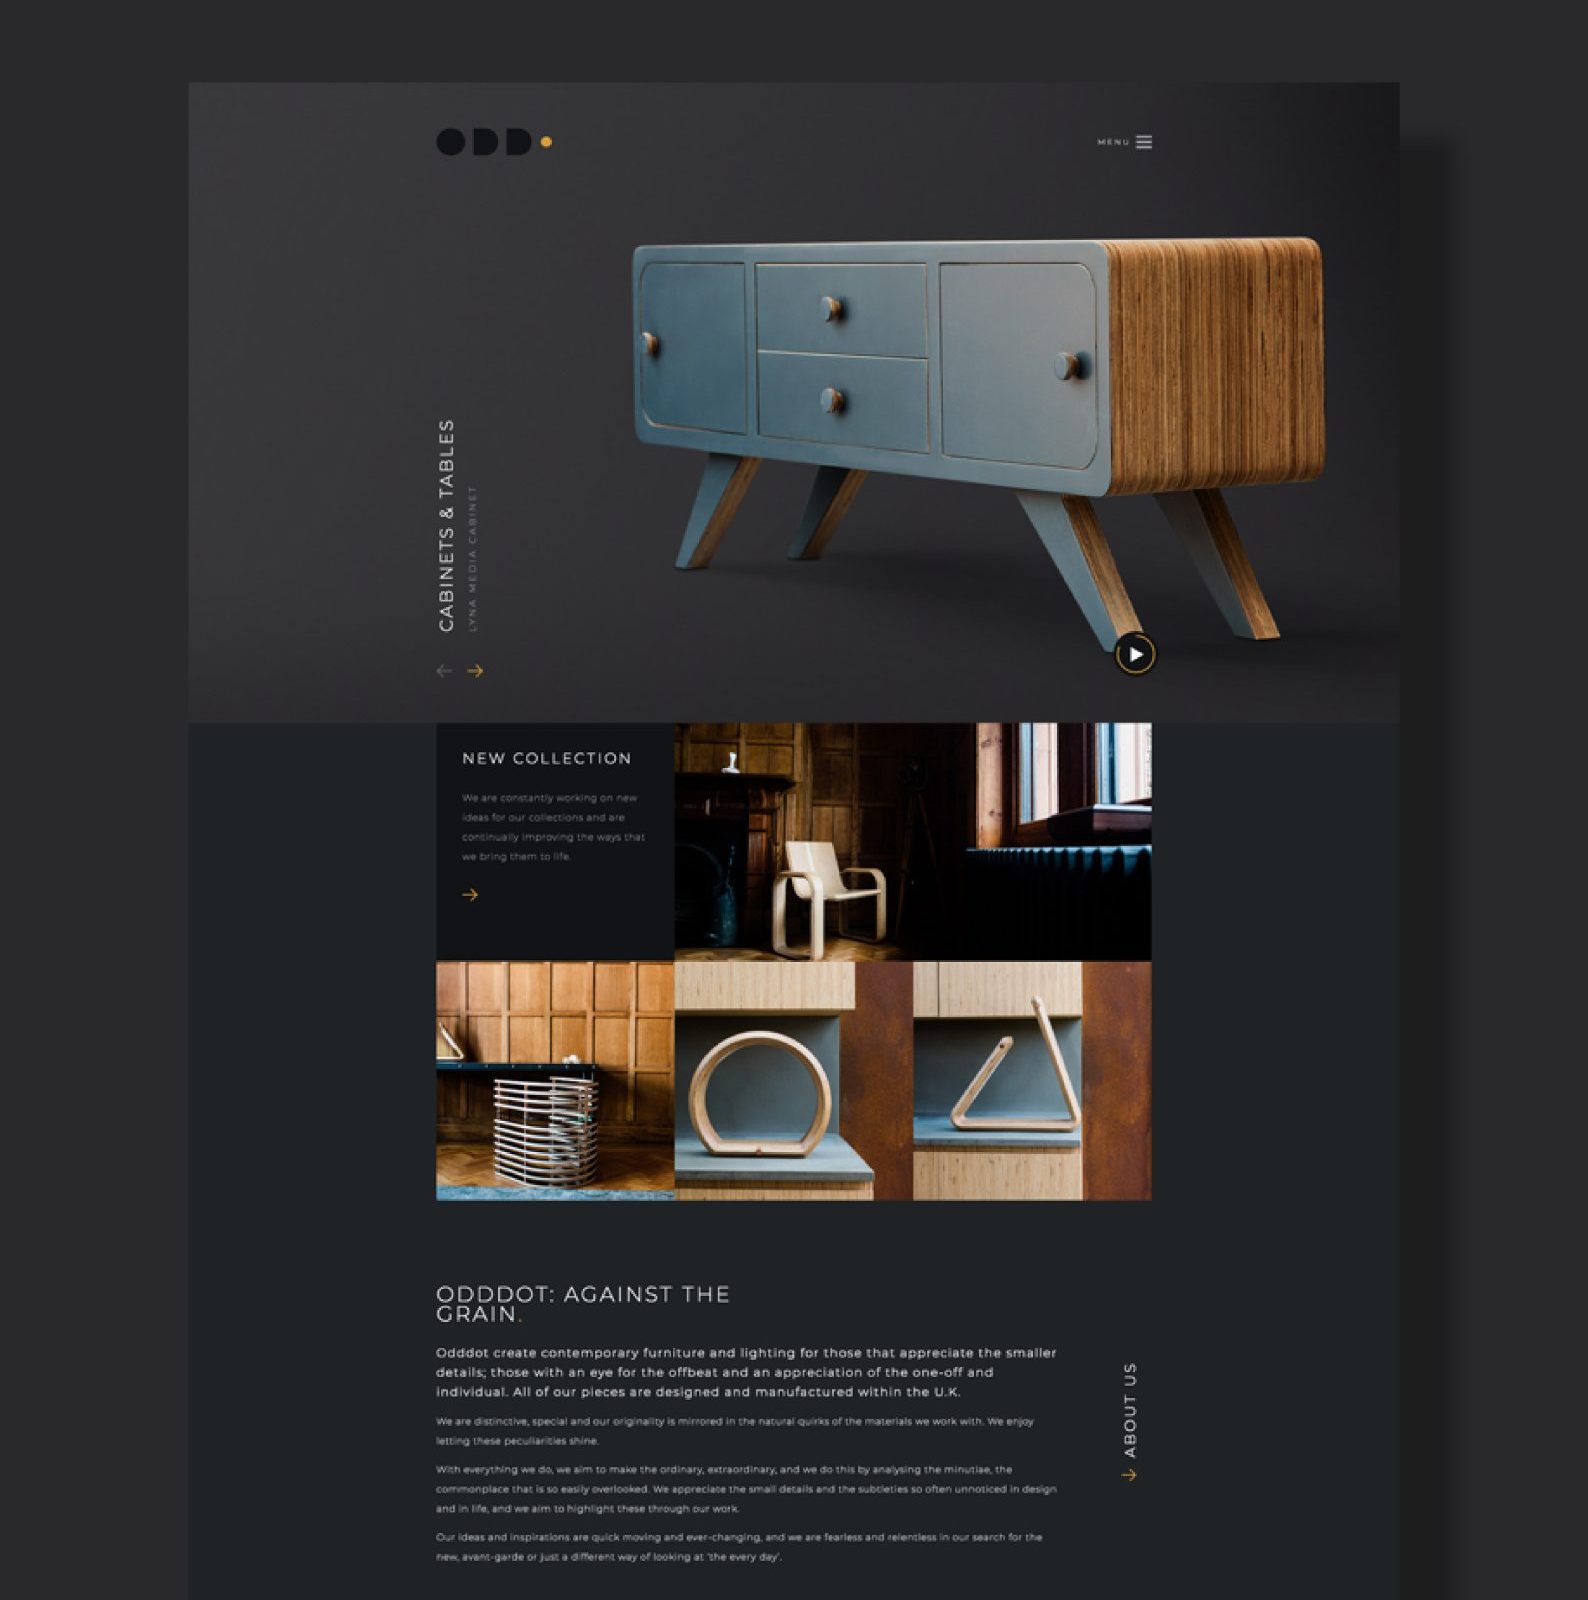 A sophisticated website design featuring a furniture store with a stylish blue and wood cabinet in the header, various interior design photos, and elegant menu options. The layout is sleek, modern, and uses a dark